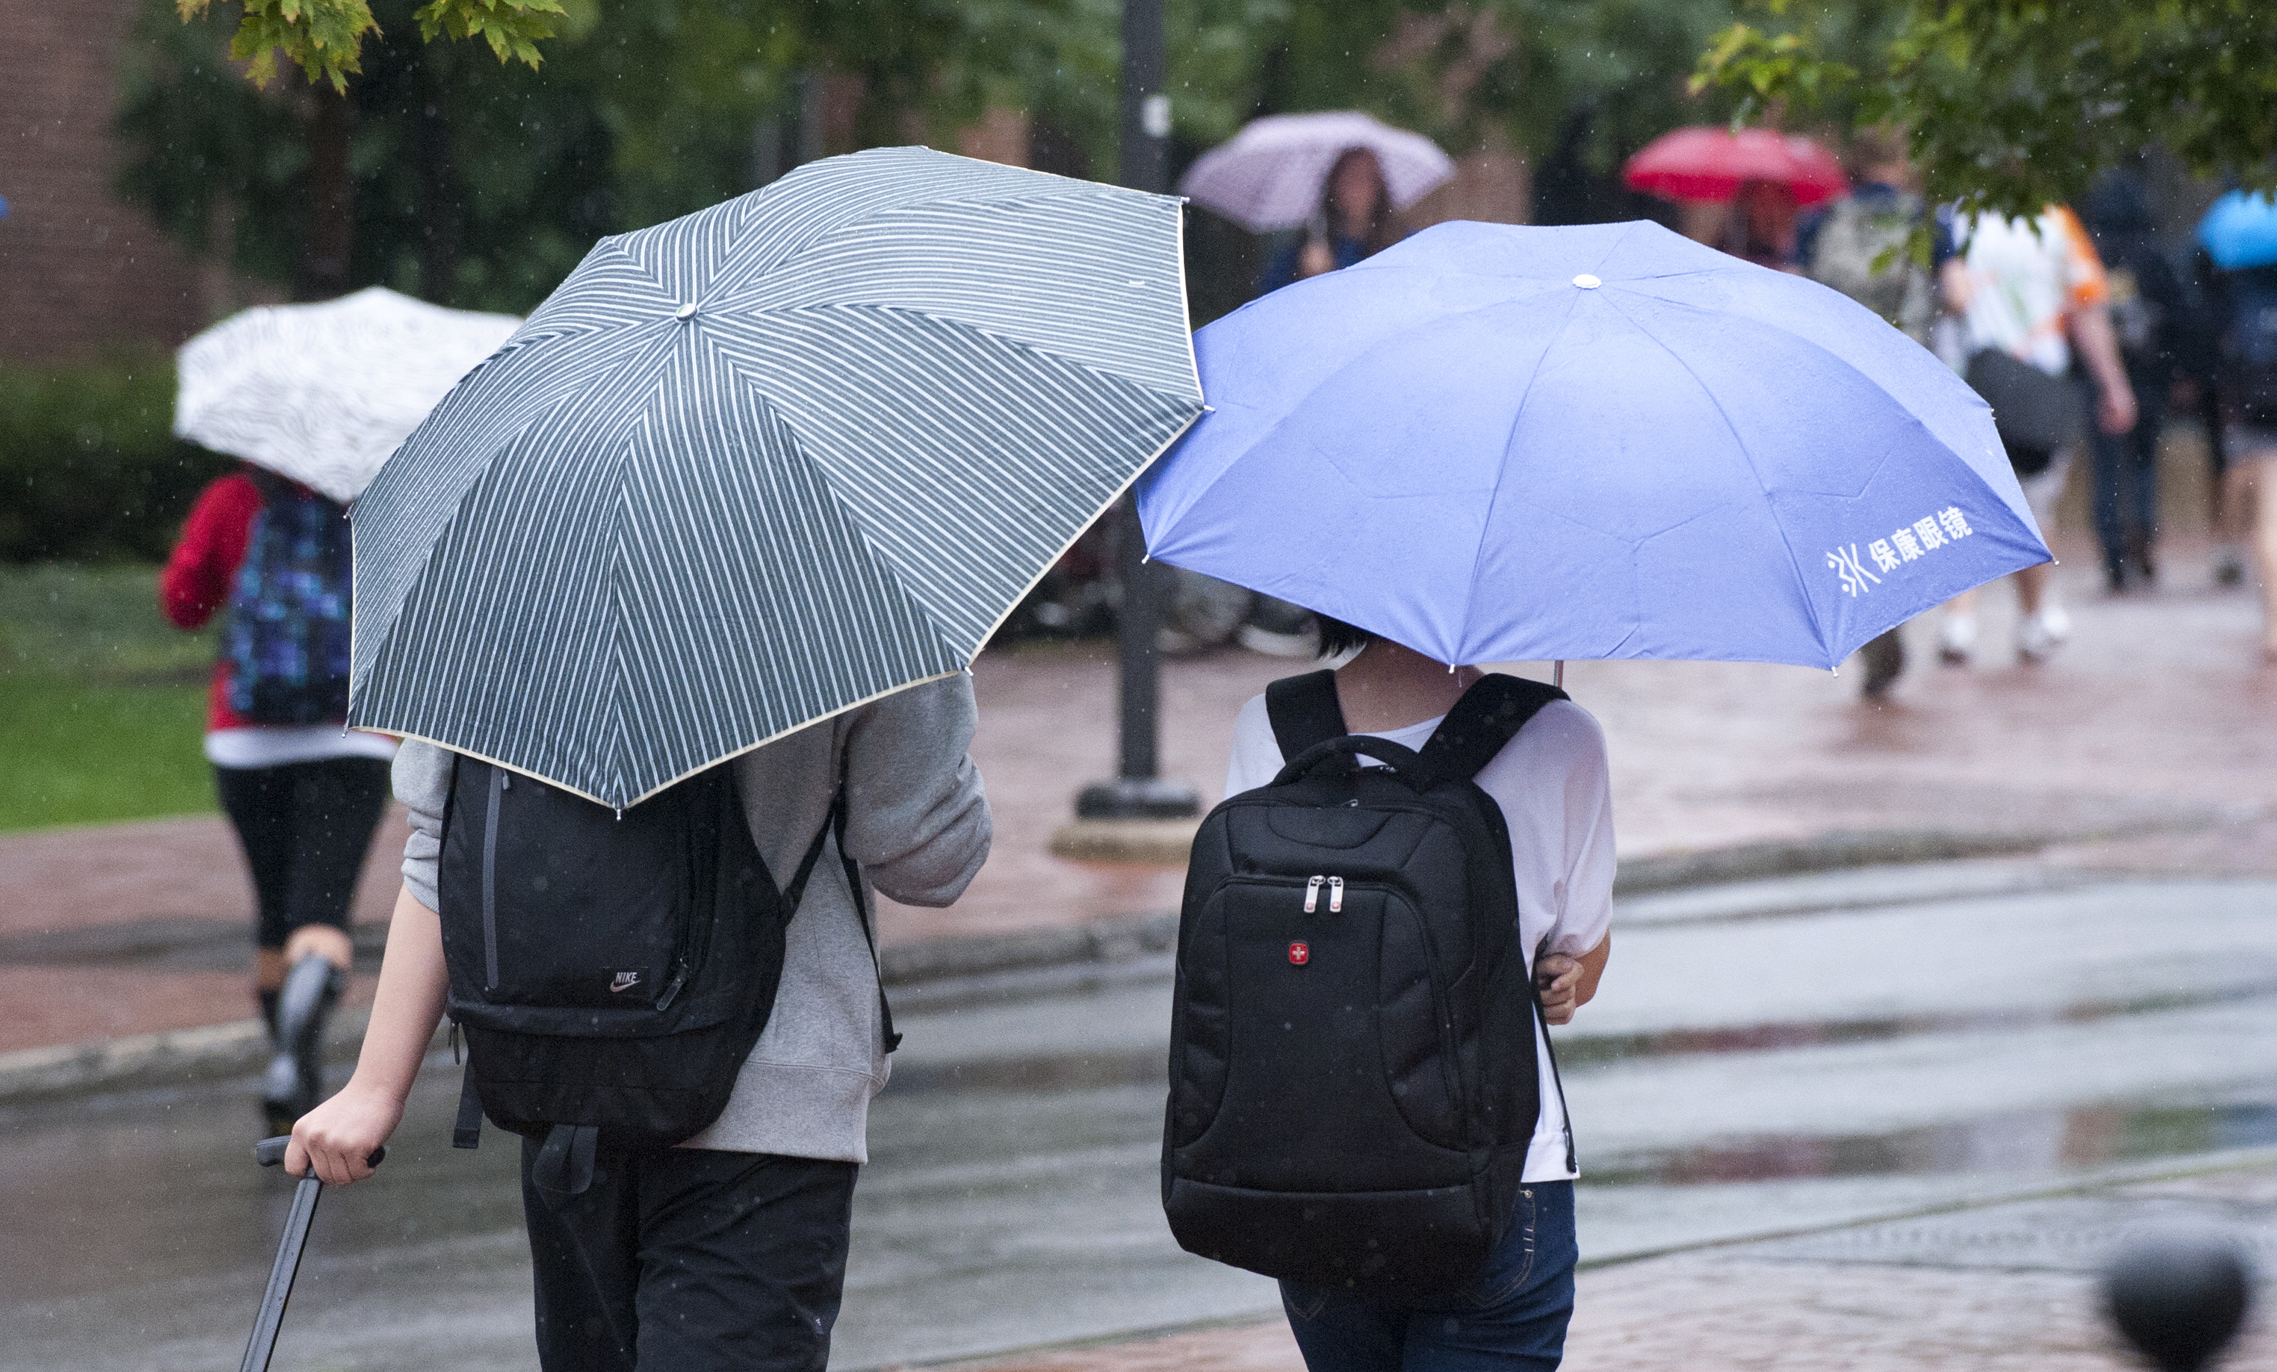 Two students with backpacks from the back with umbrellas walking together in the rain